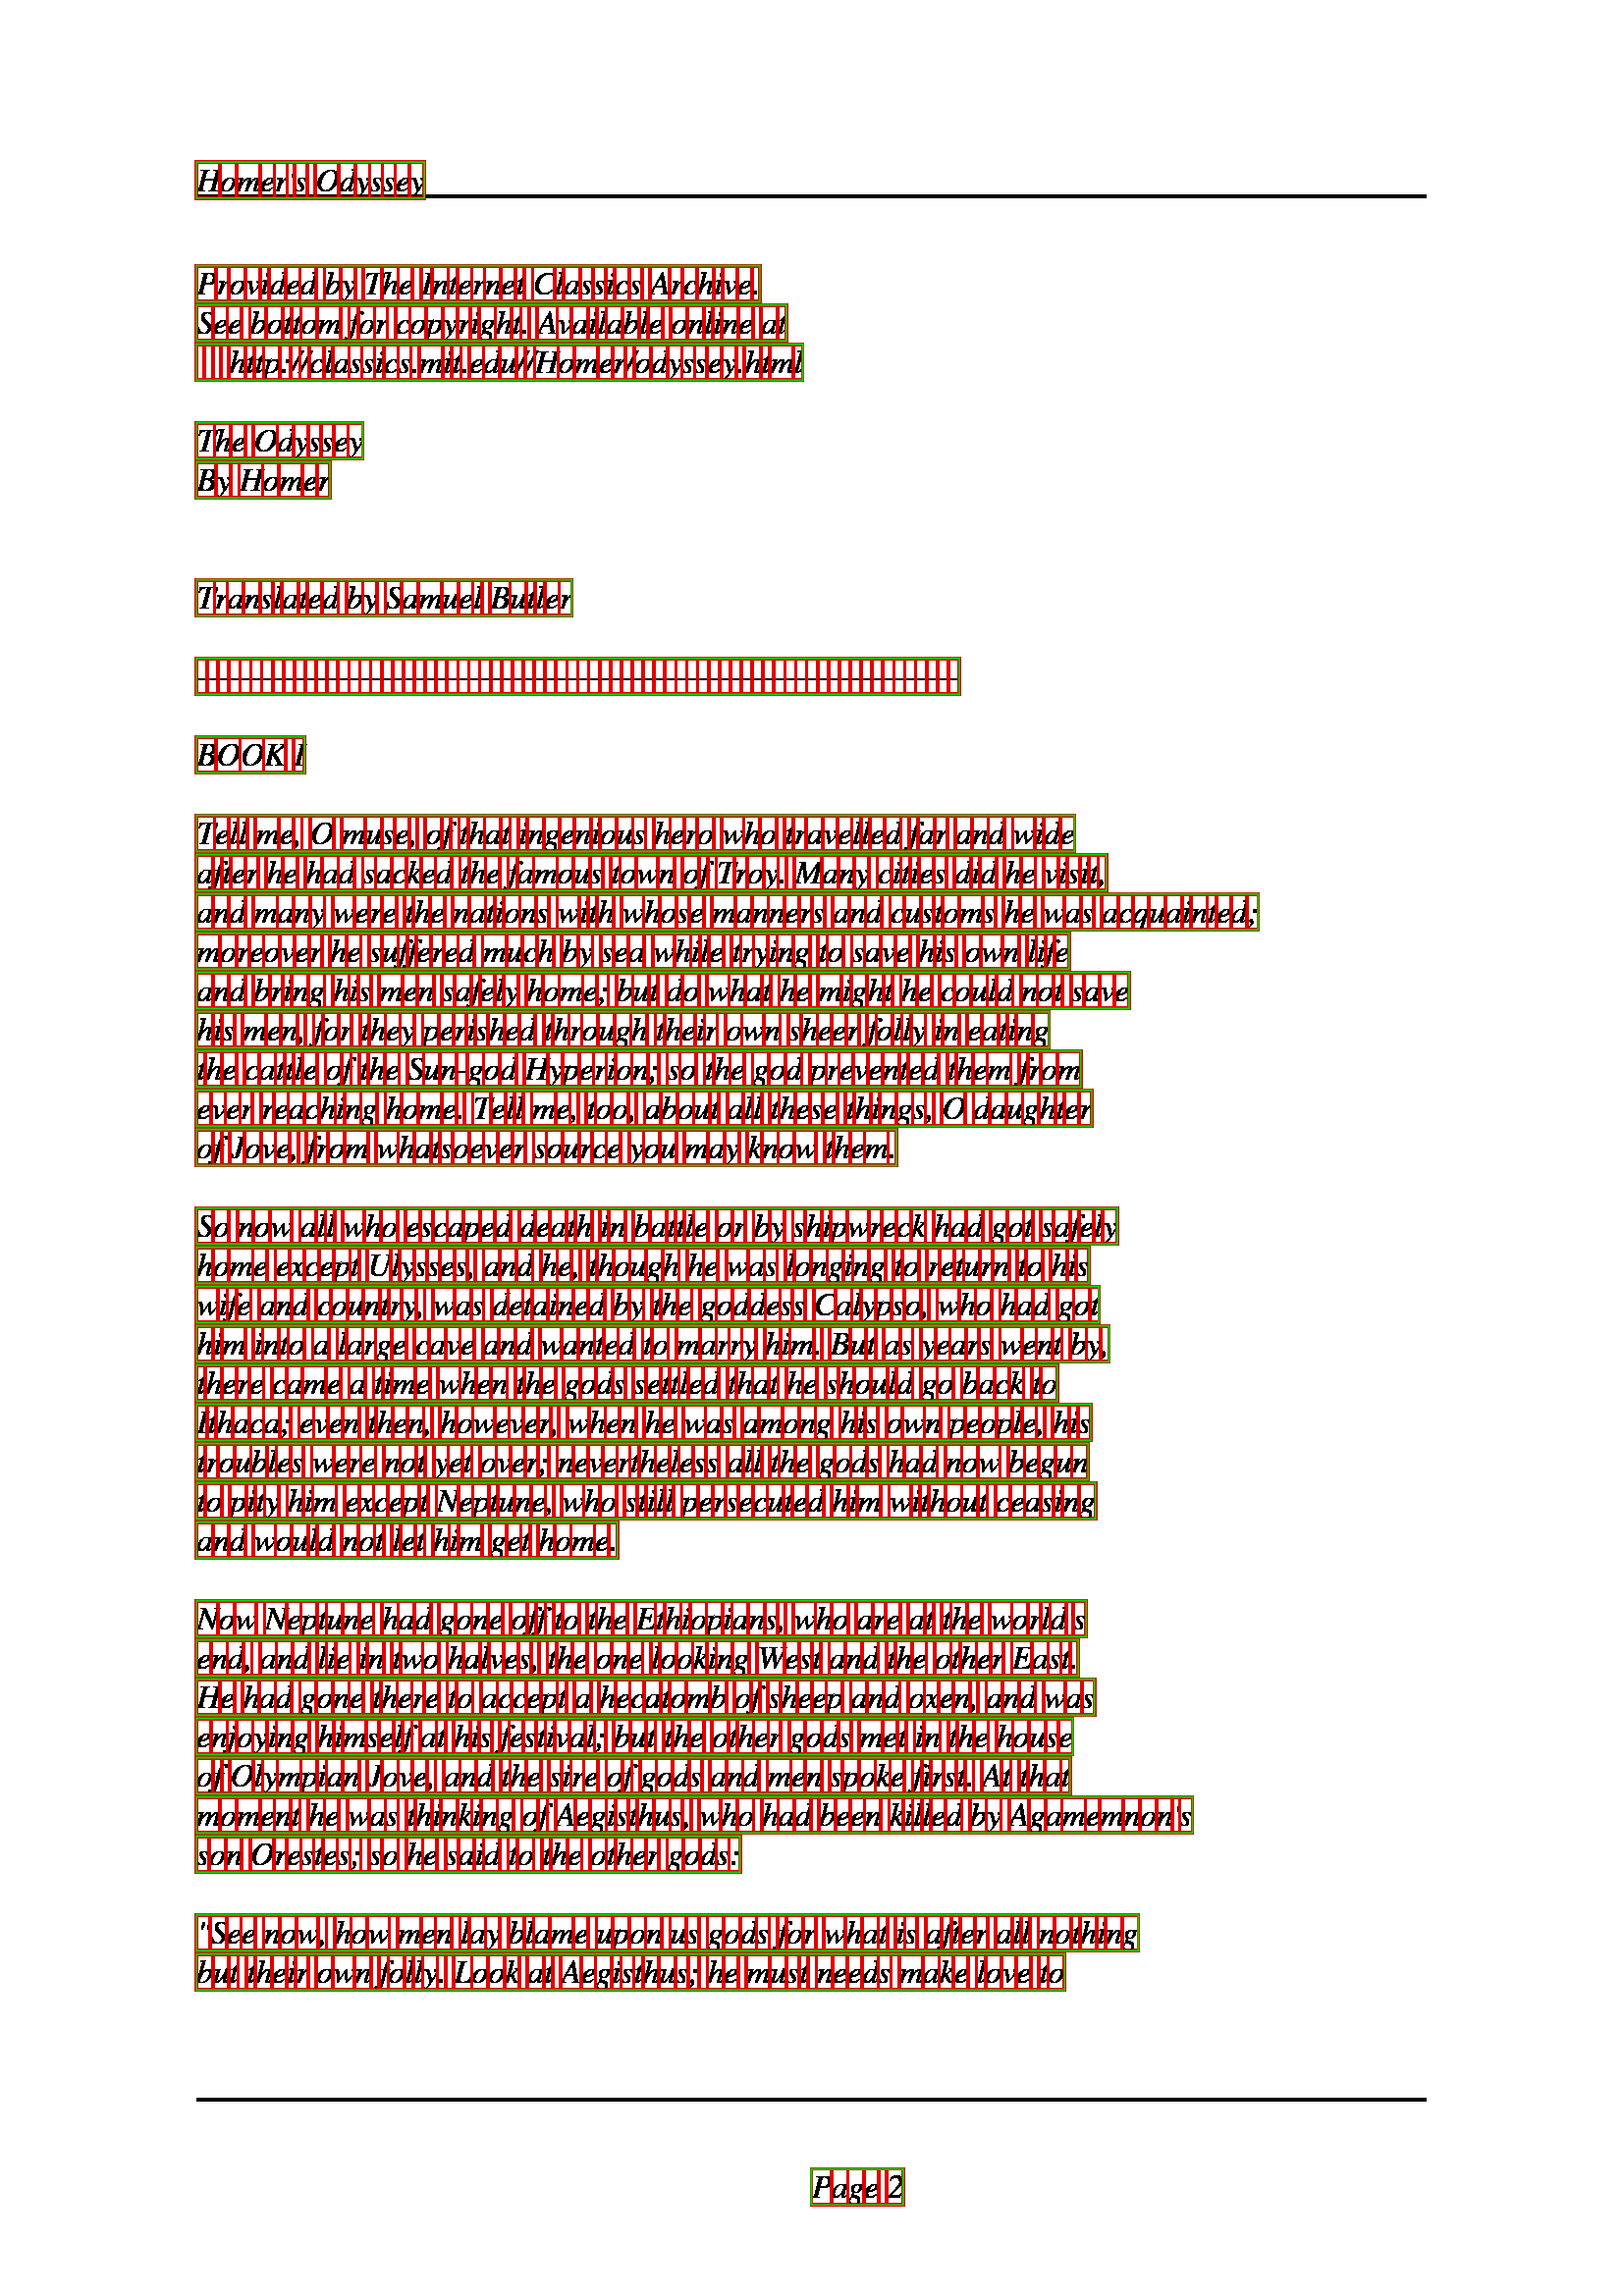 Text Processing Sample